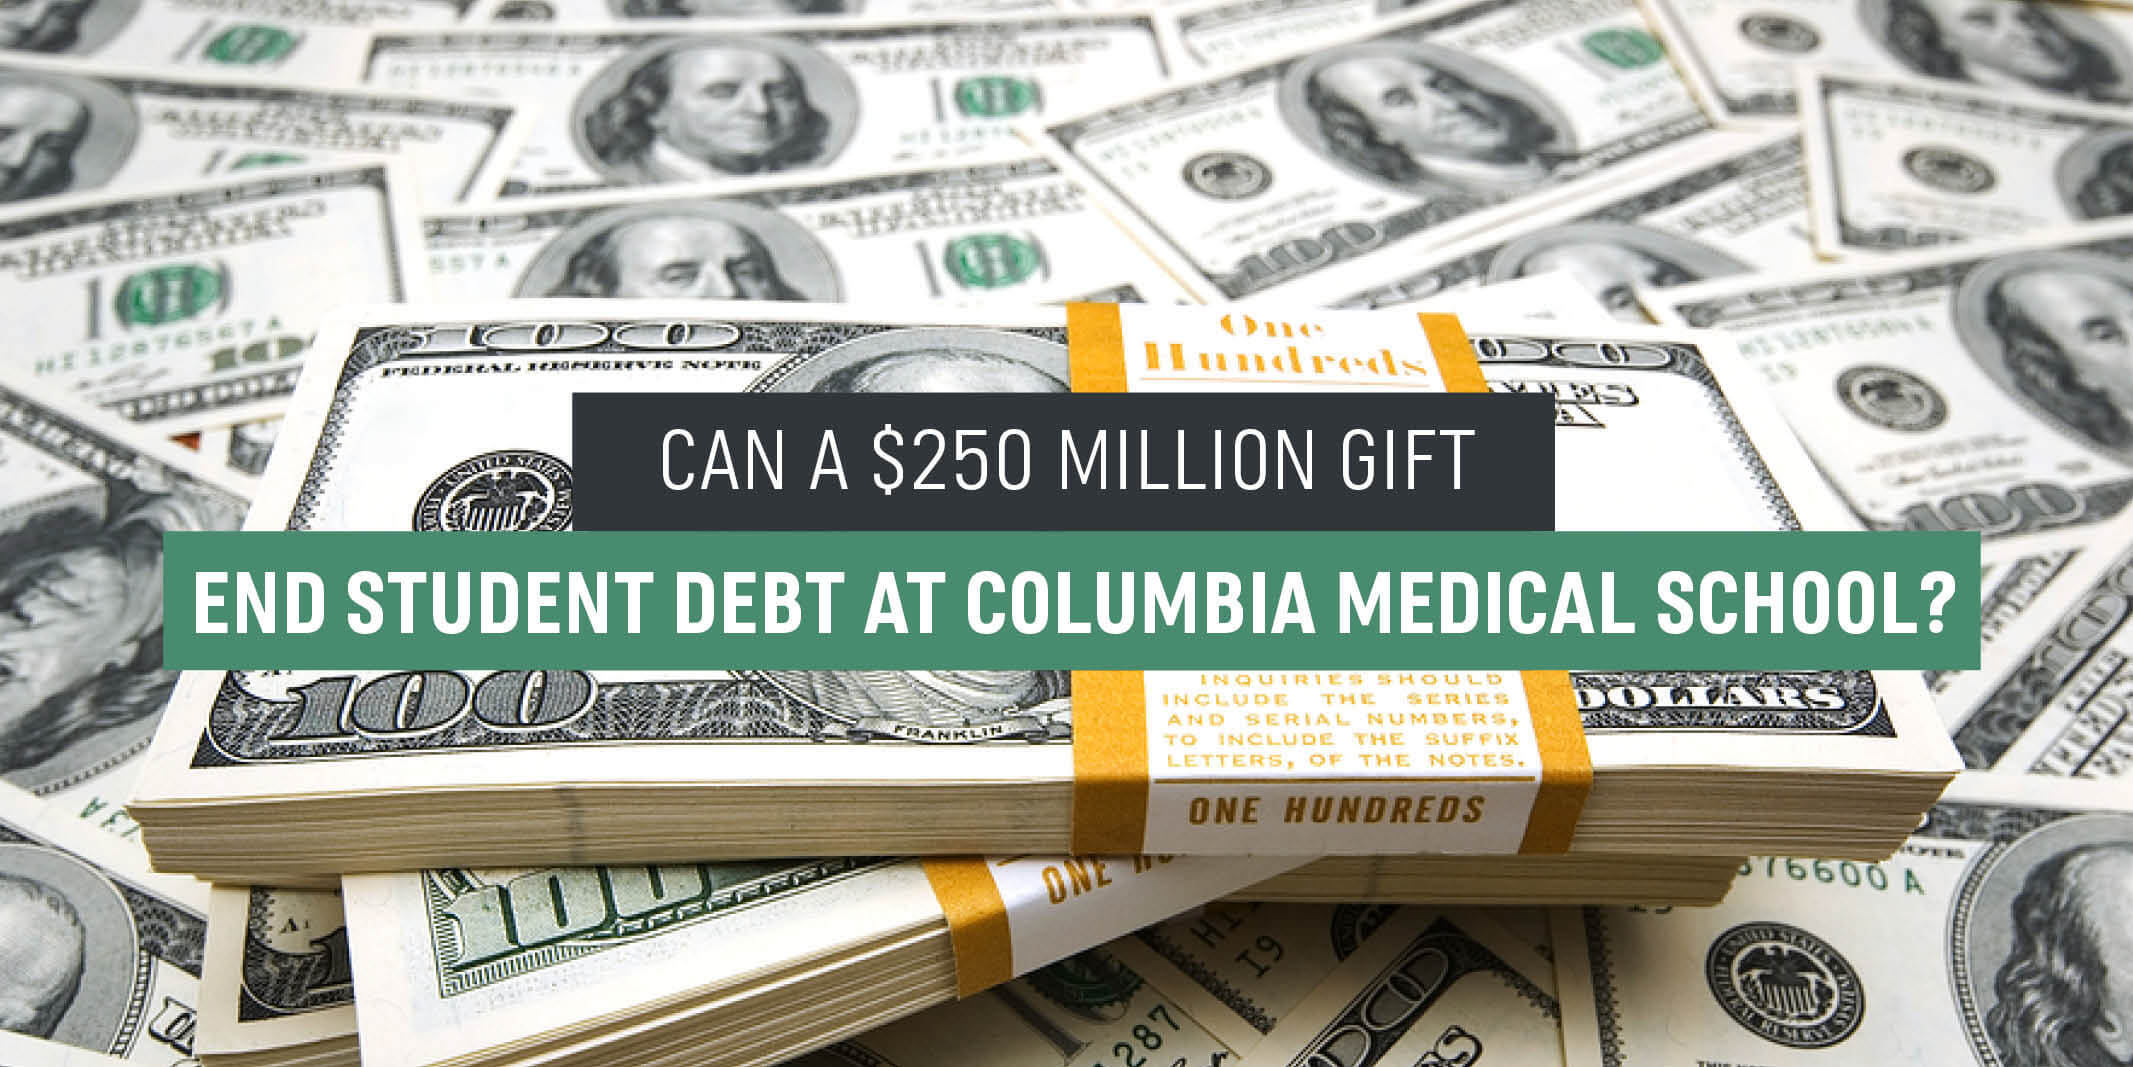 Can a $250 million gift end student debt at Columbia Medical School? 